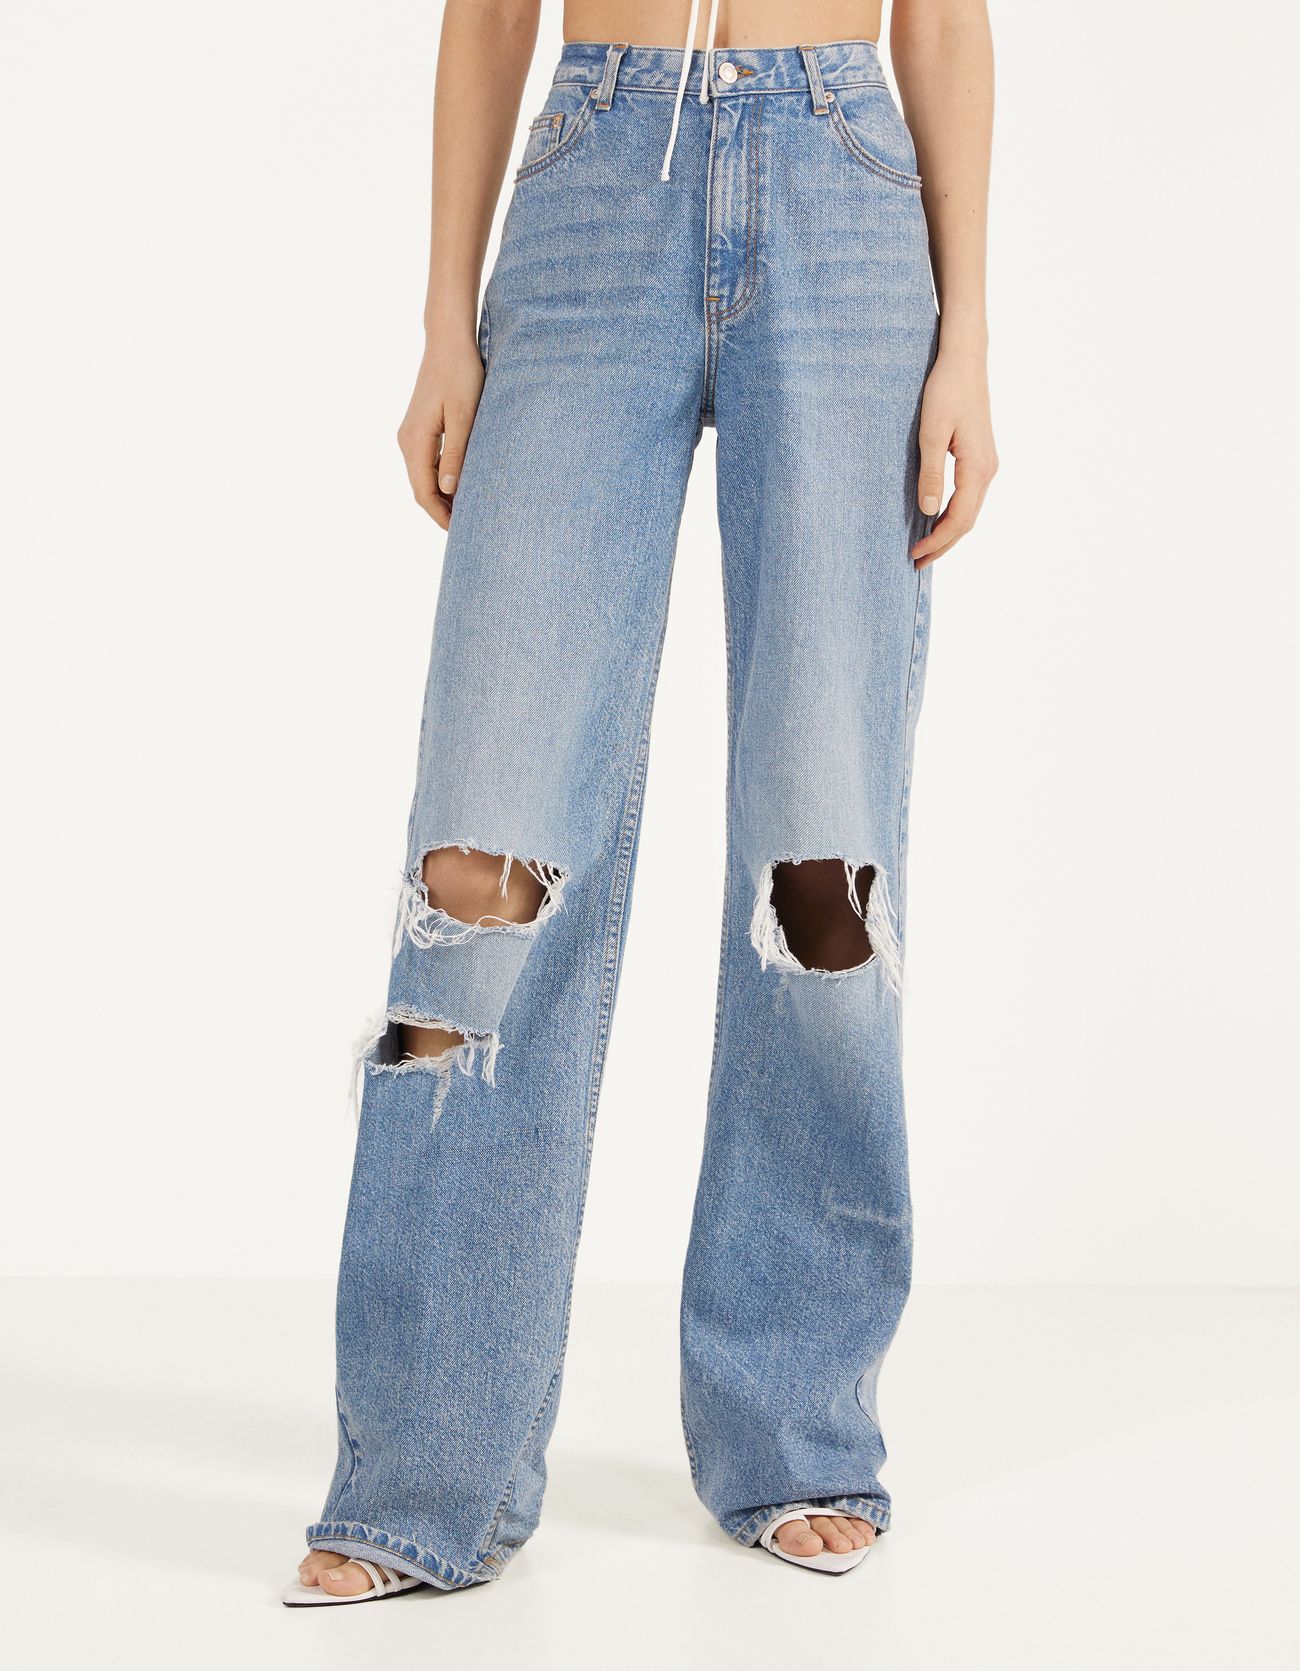 flare jeans ripped